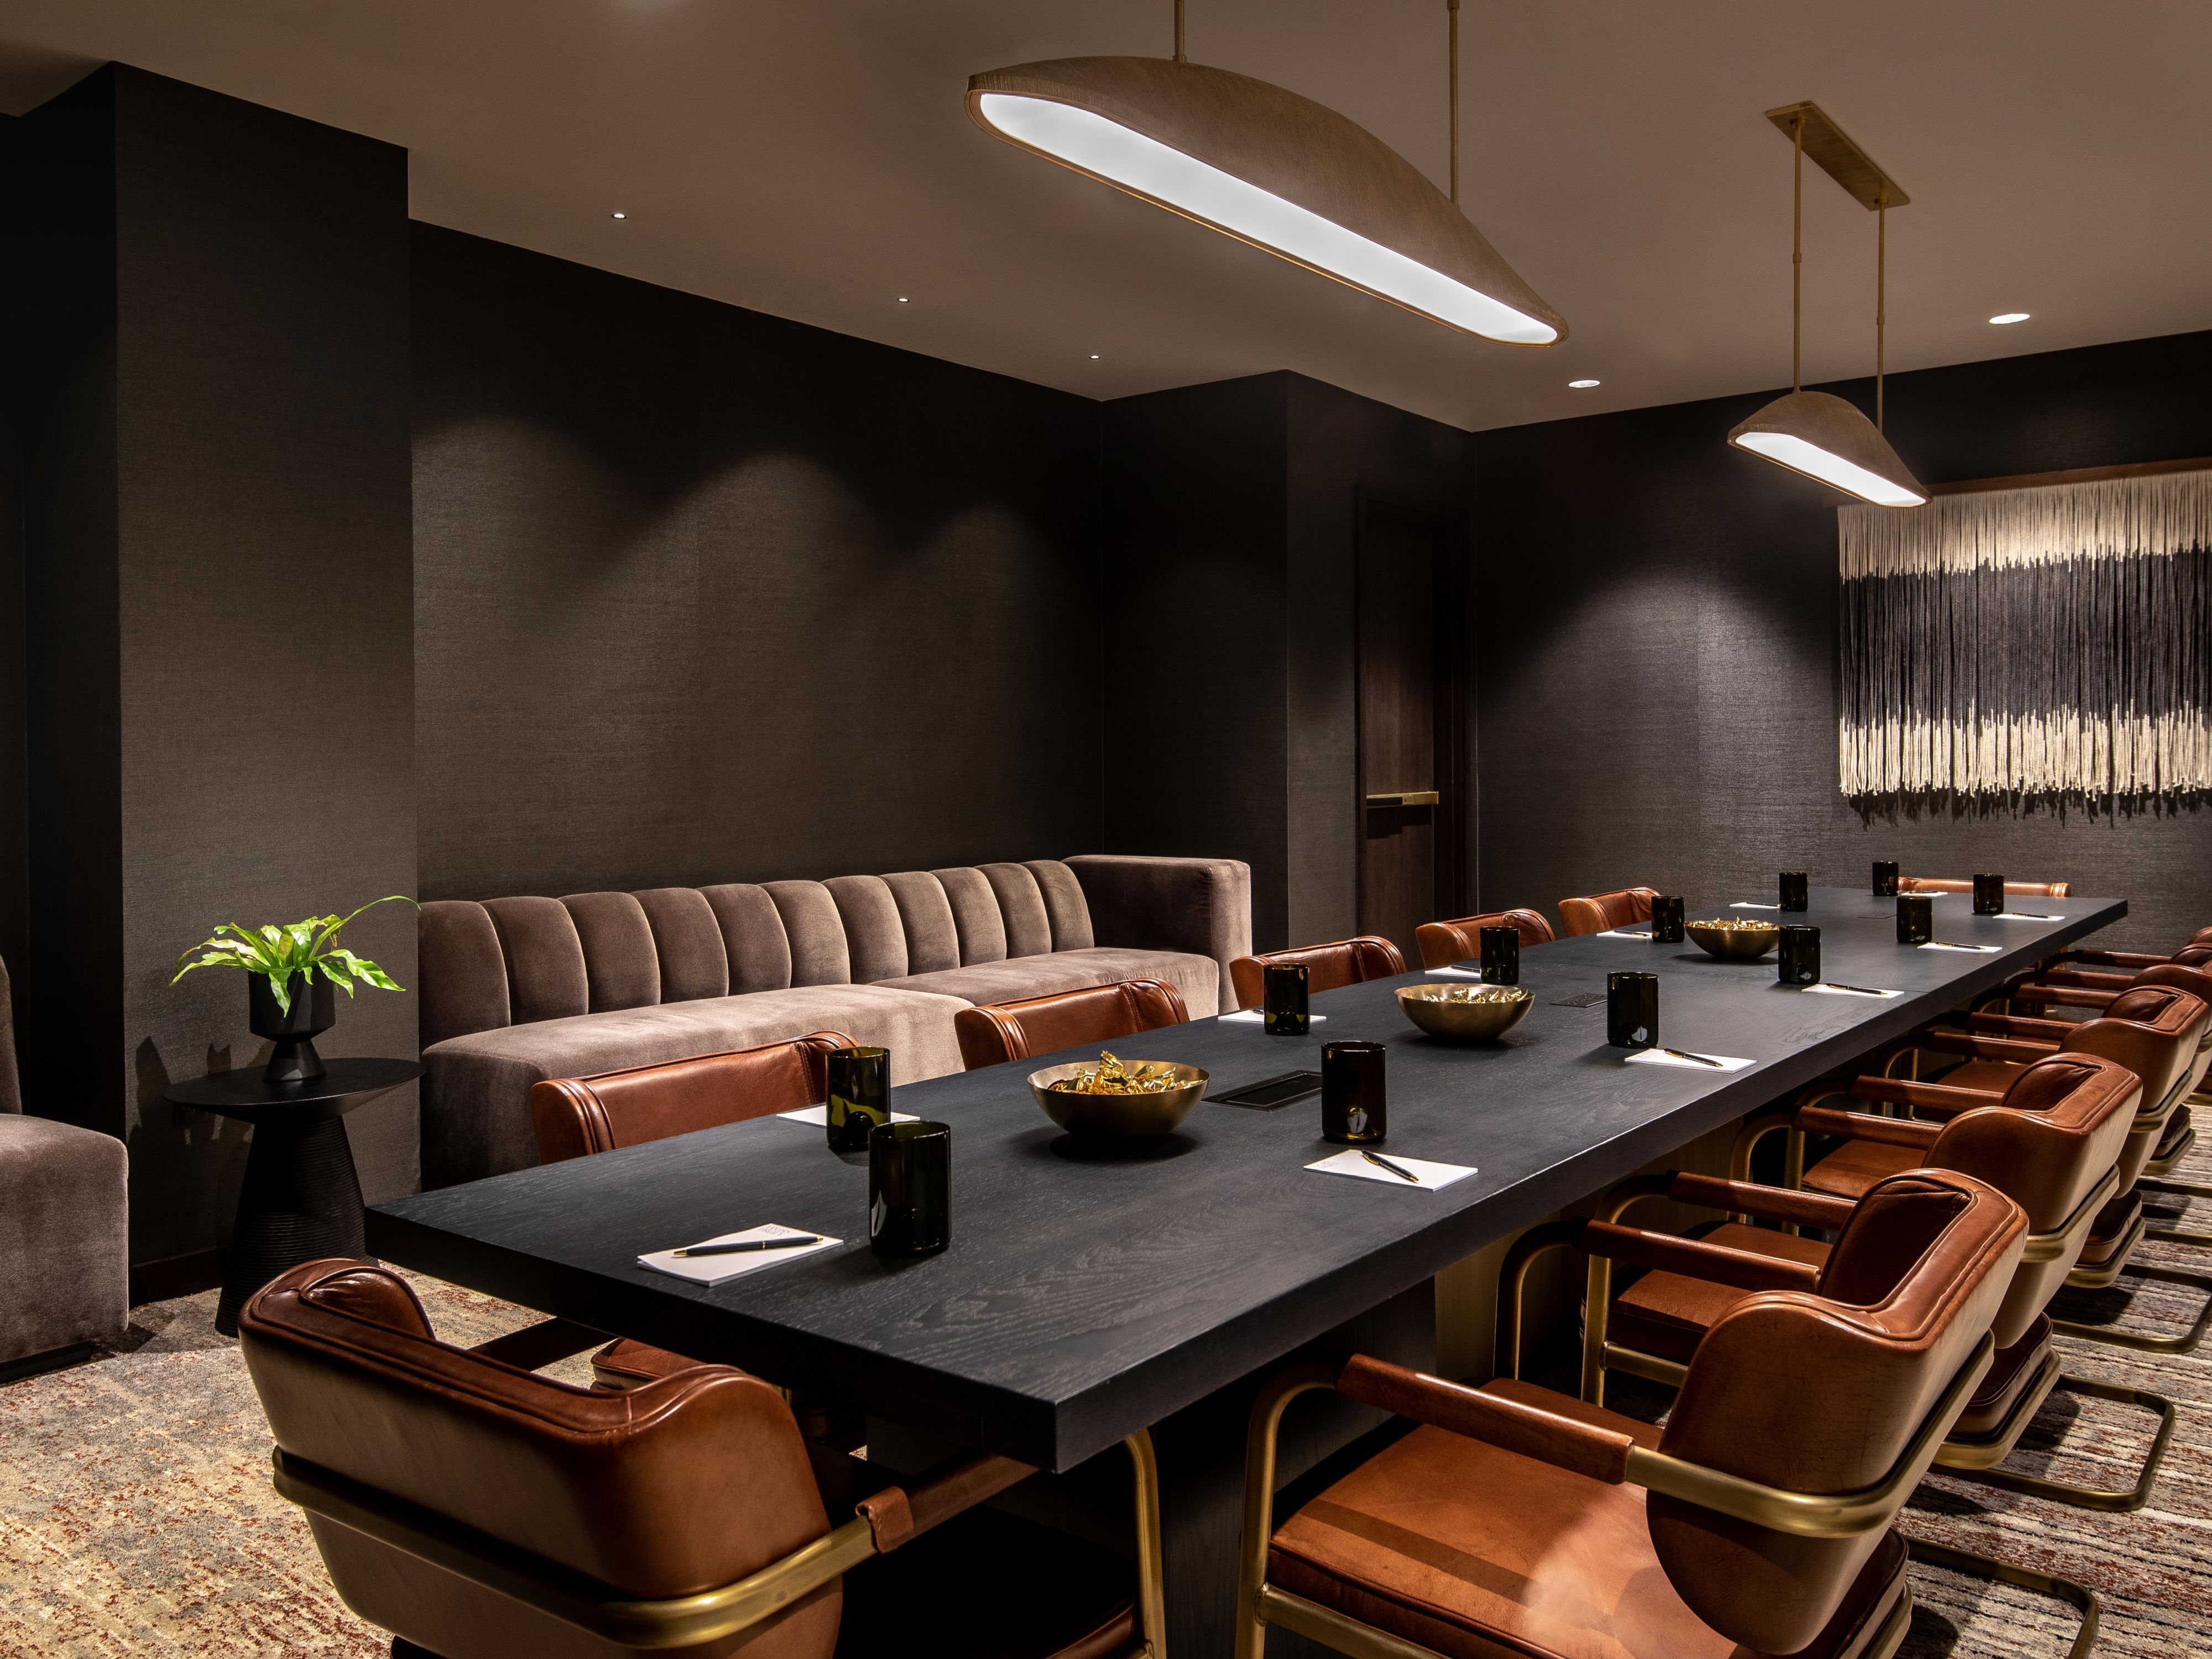 Updated meeting space featuring a boardroom table and leather chairs